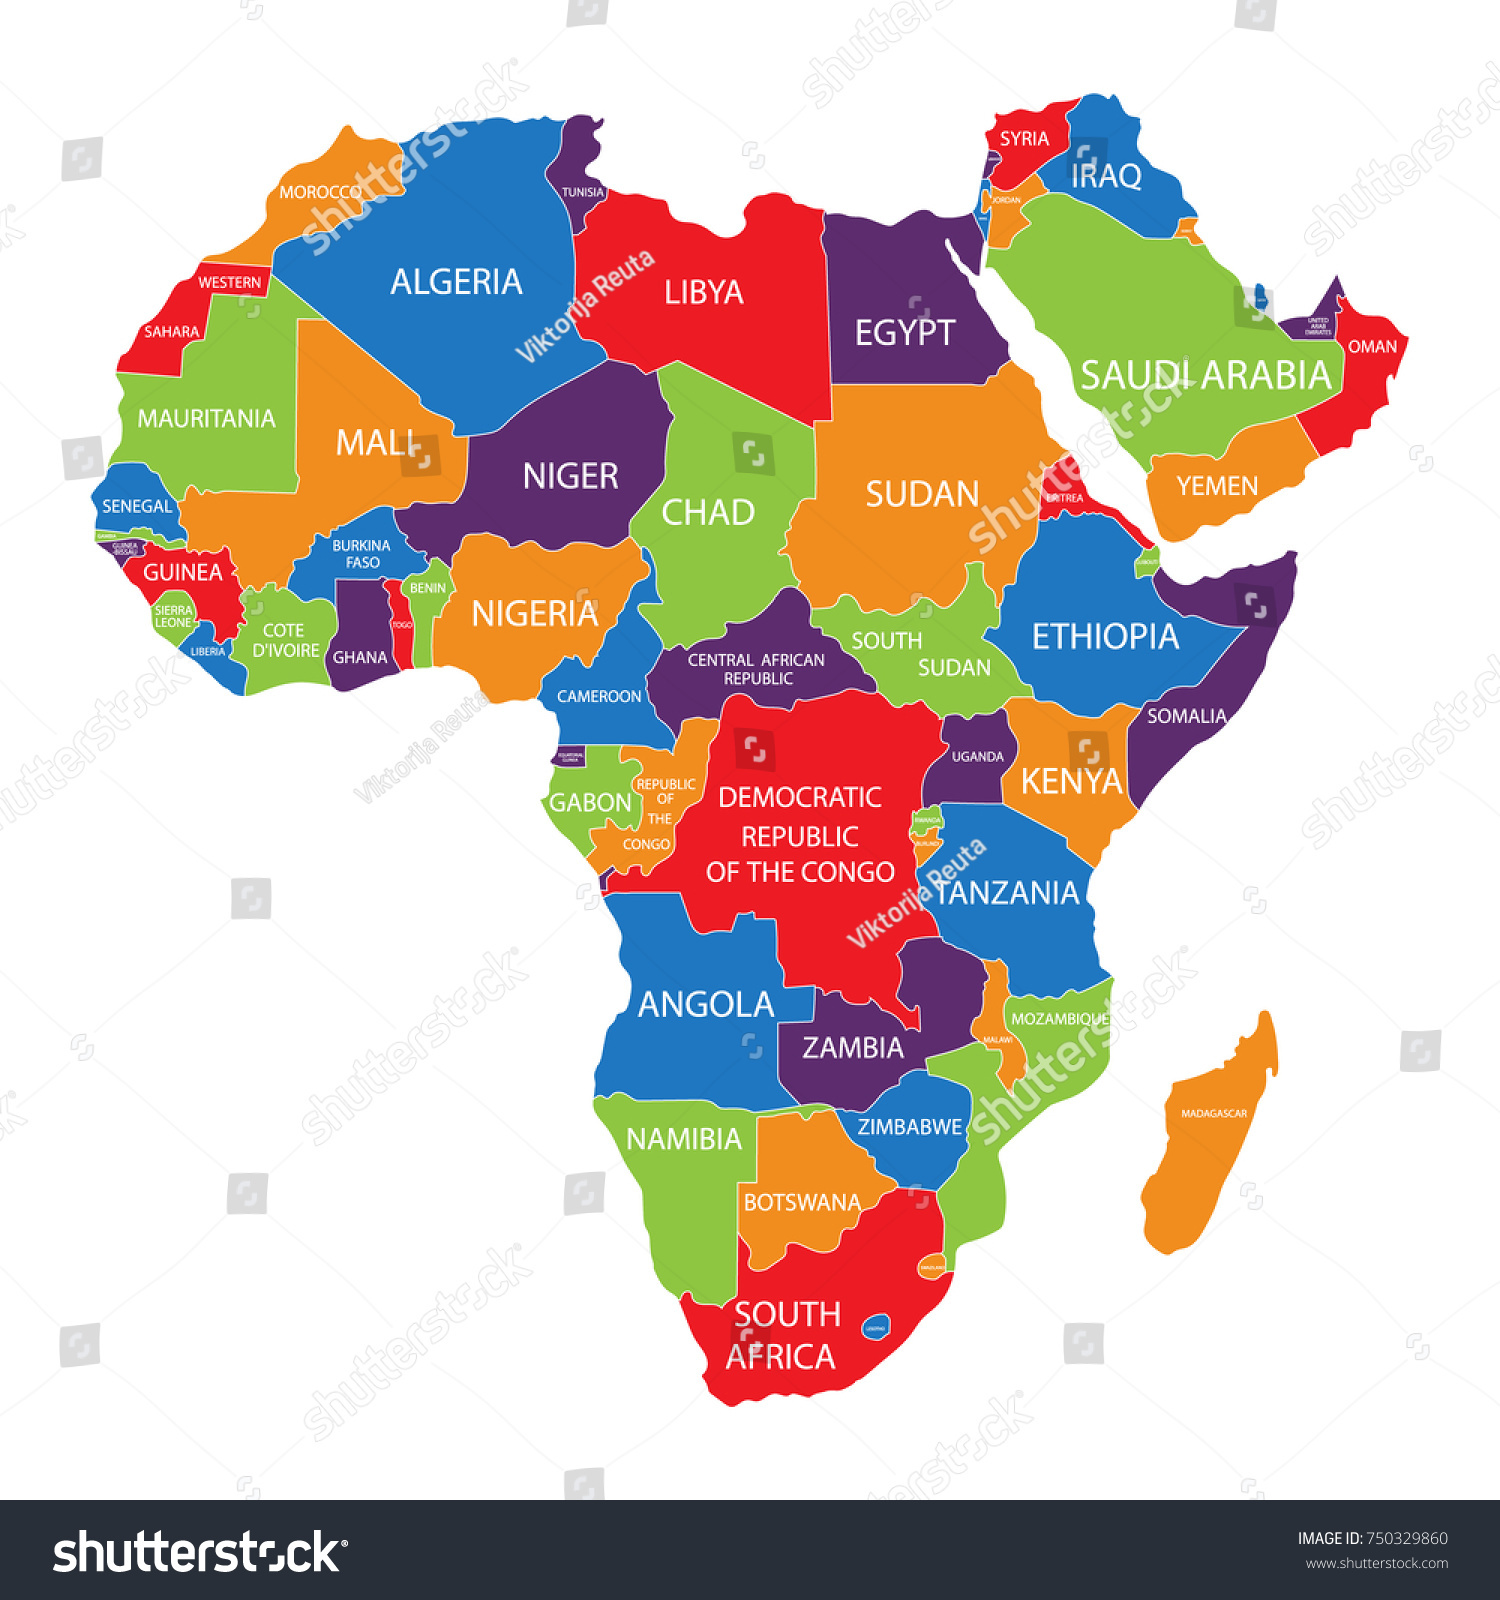 Stock Vector Vector Illustration Africa Map With Countries Names Isolated On White Background African Continent 750329860 